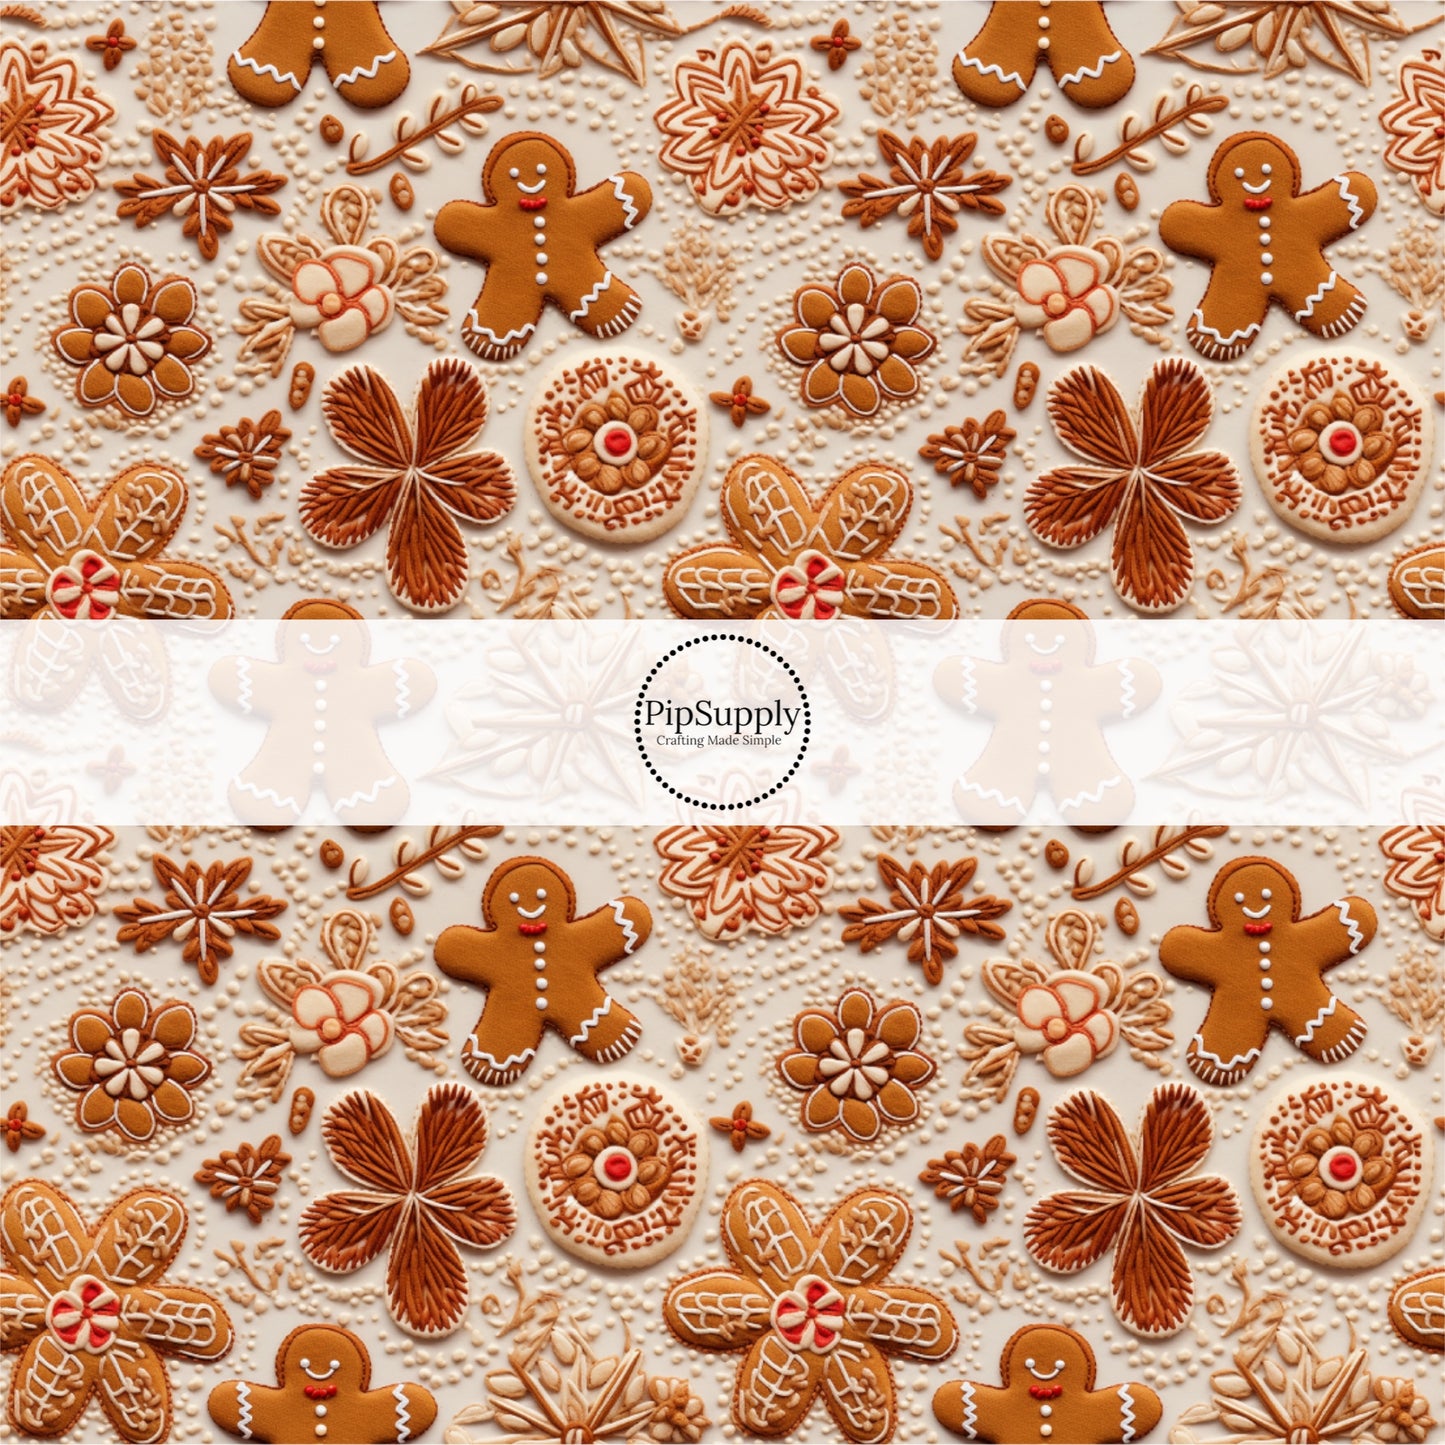 These holiday sewn pattern themed fabric by the yard features Christmas gingerbread cookies. This fun Christmas fabric can be used for all your sewing and crafting needs!